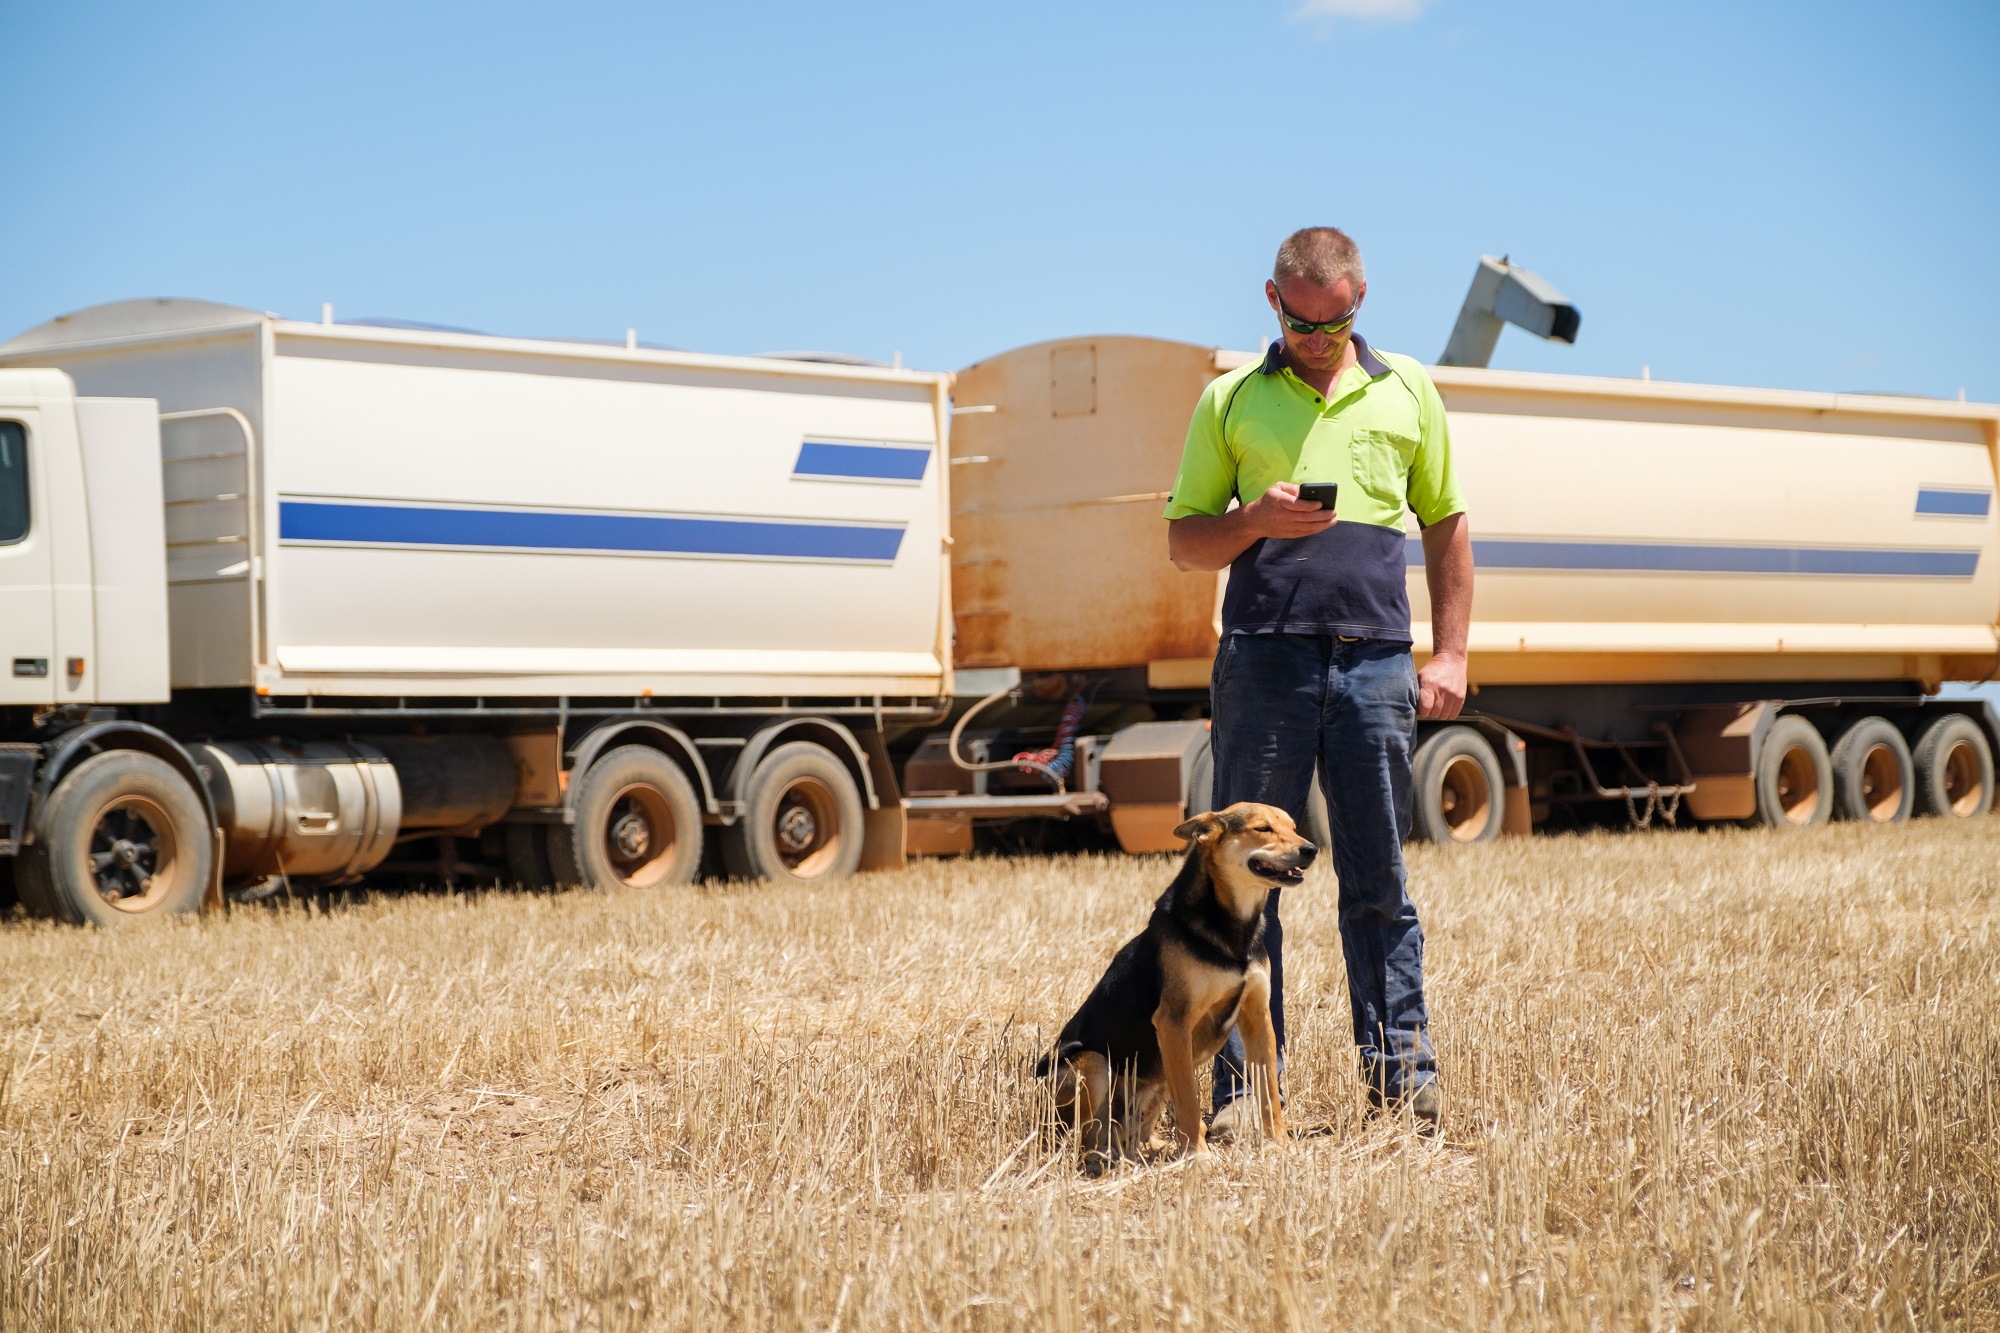 A farmer standing in front of his truck in he paddock during harvest uses his phone. while a brown dog sits at his feet.